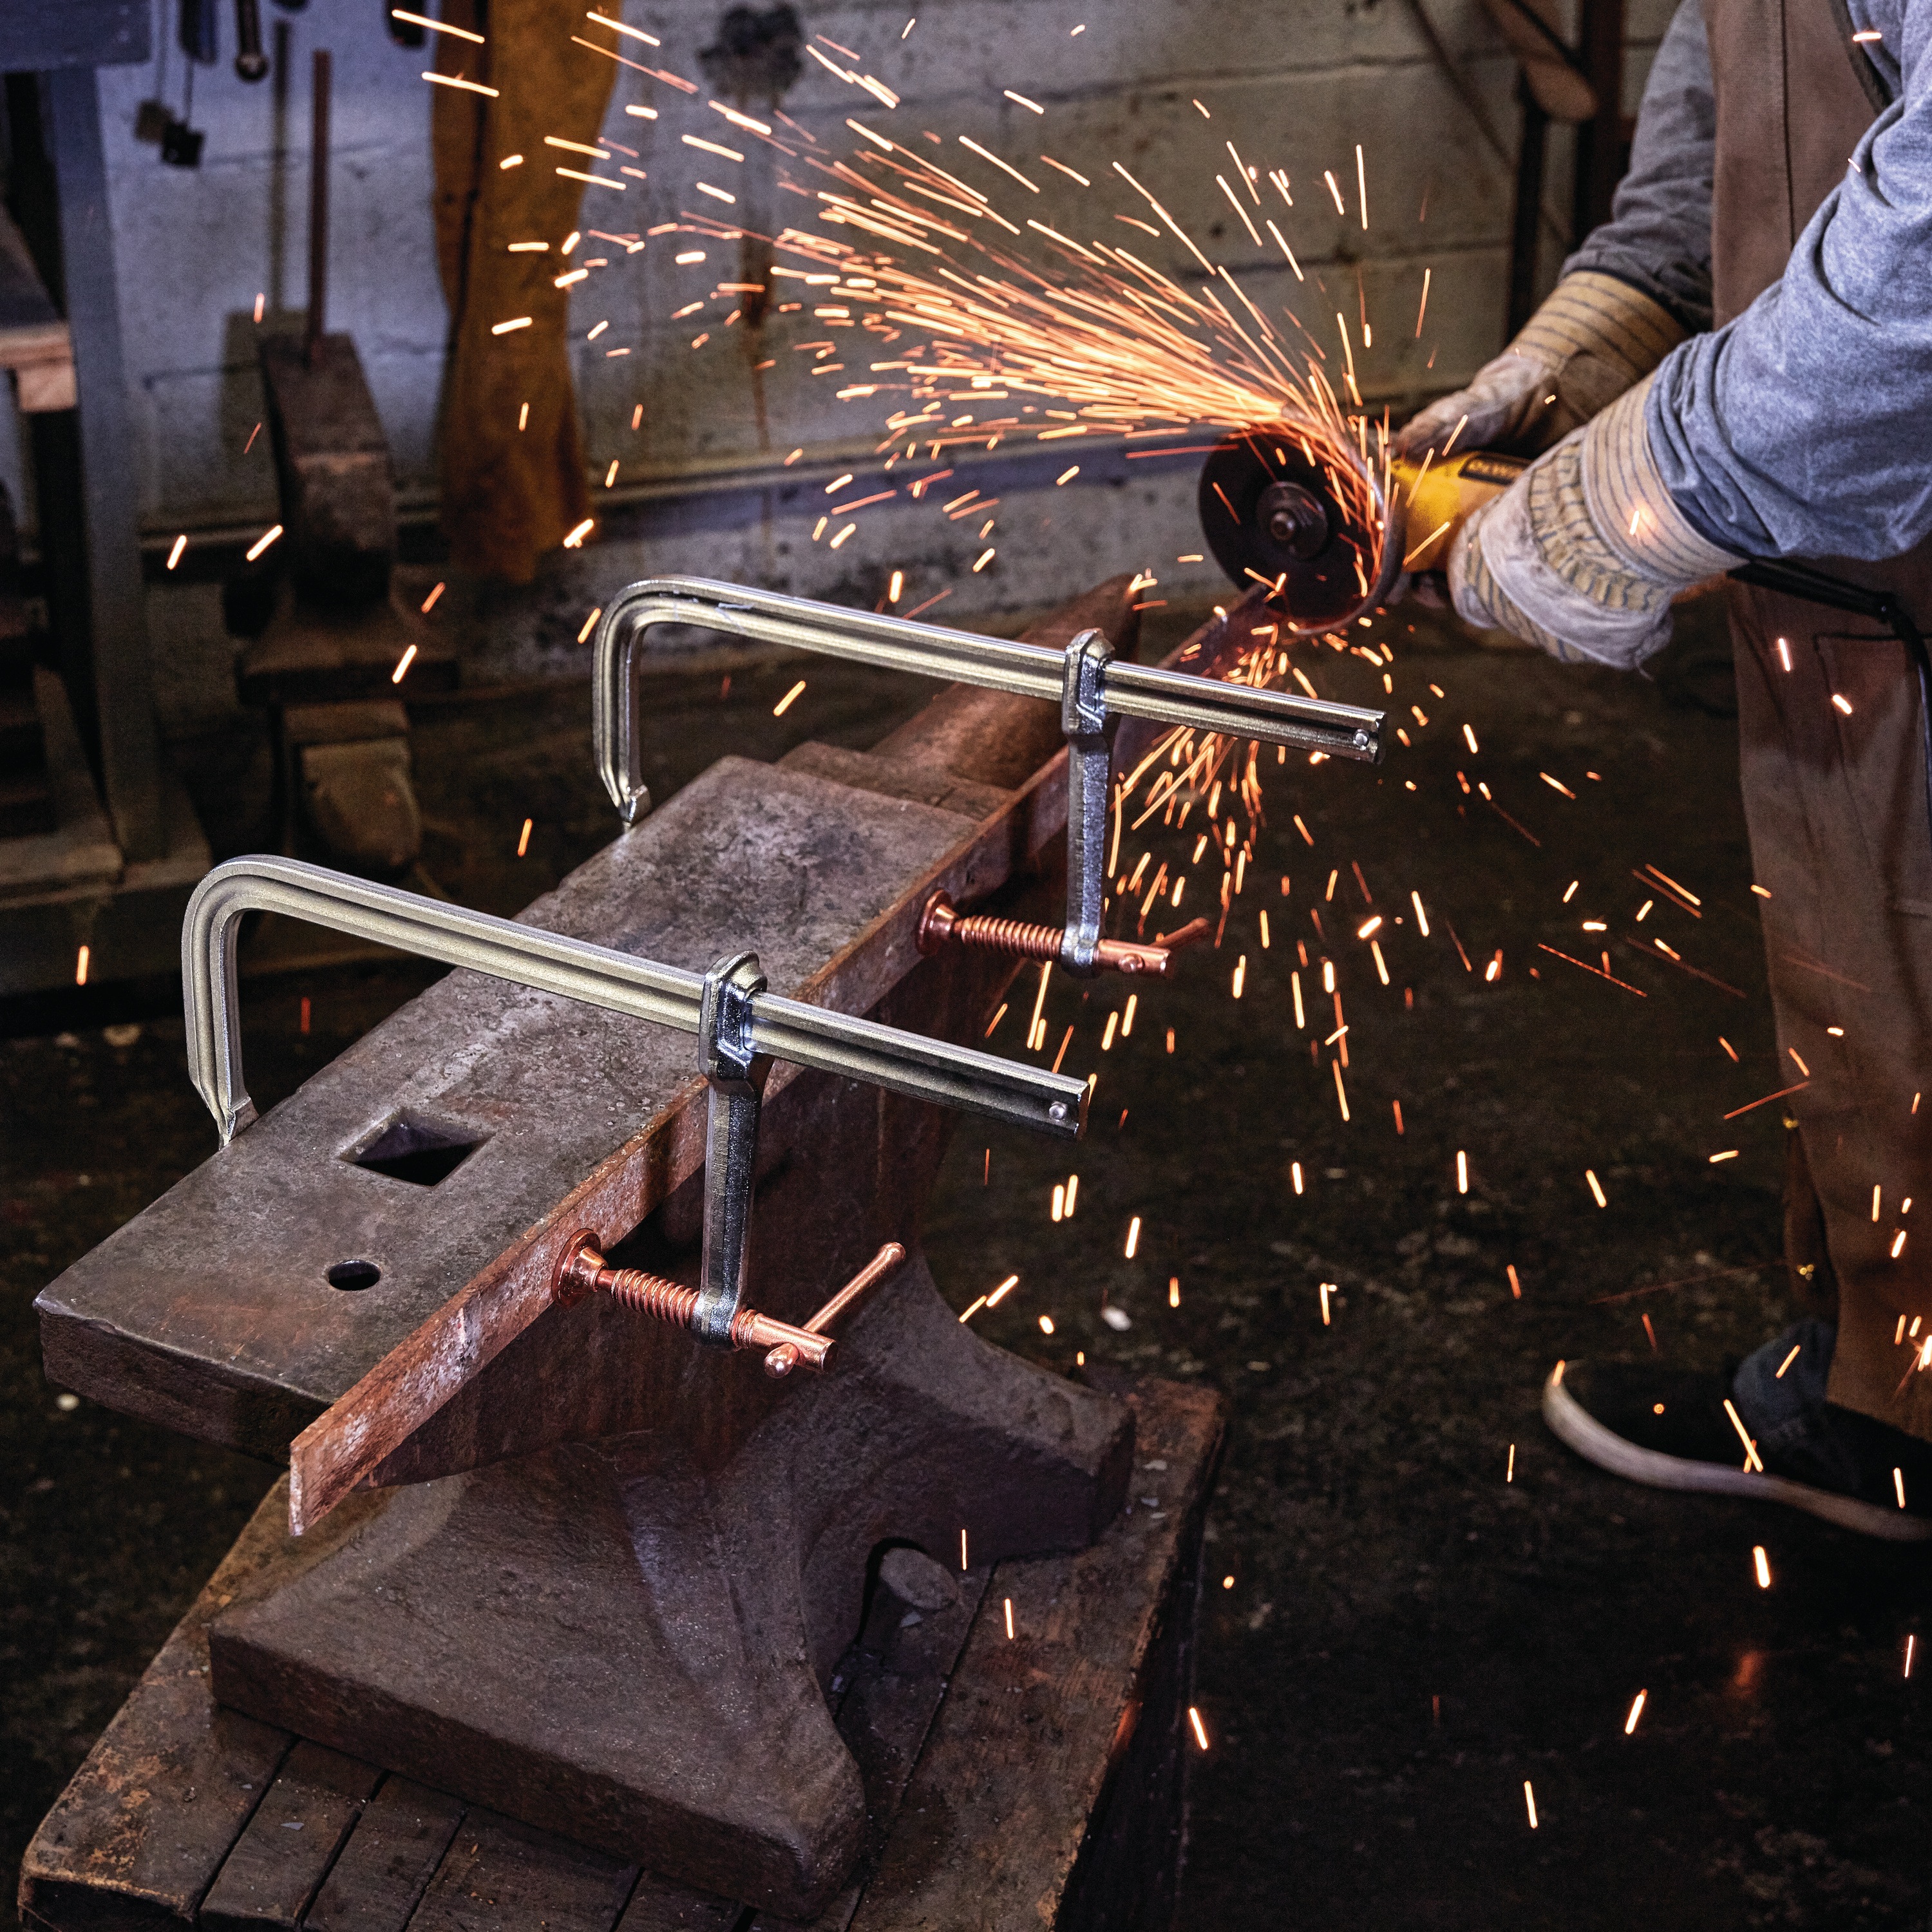 12 inch Metalworking bar Clamp being used by a person in a workshop.